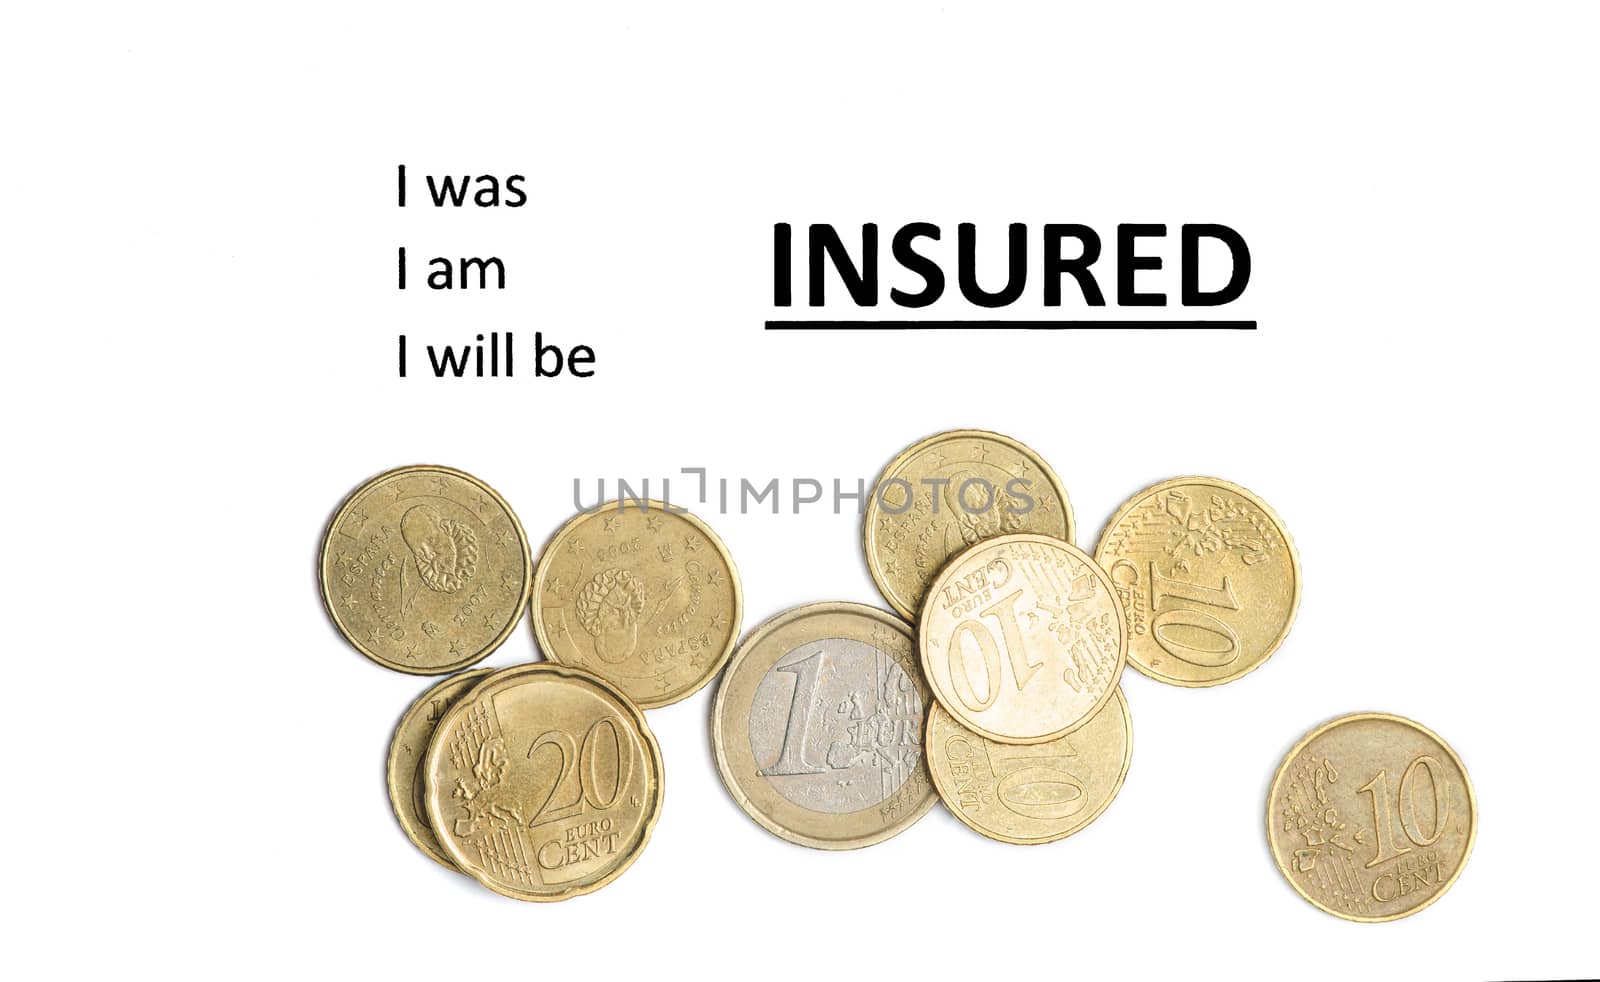 Insurance concept by richpav